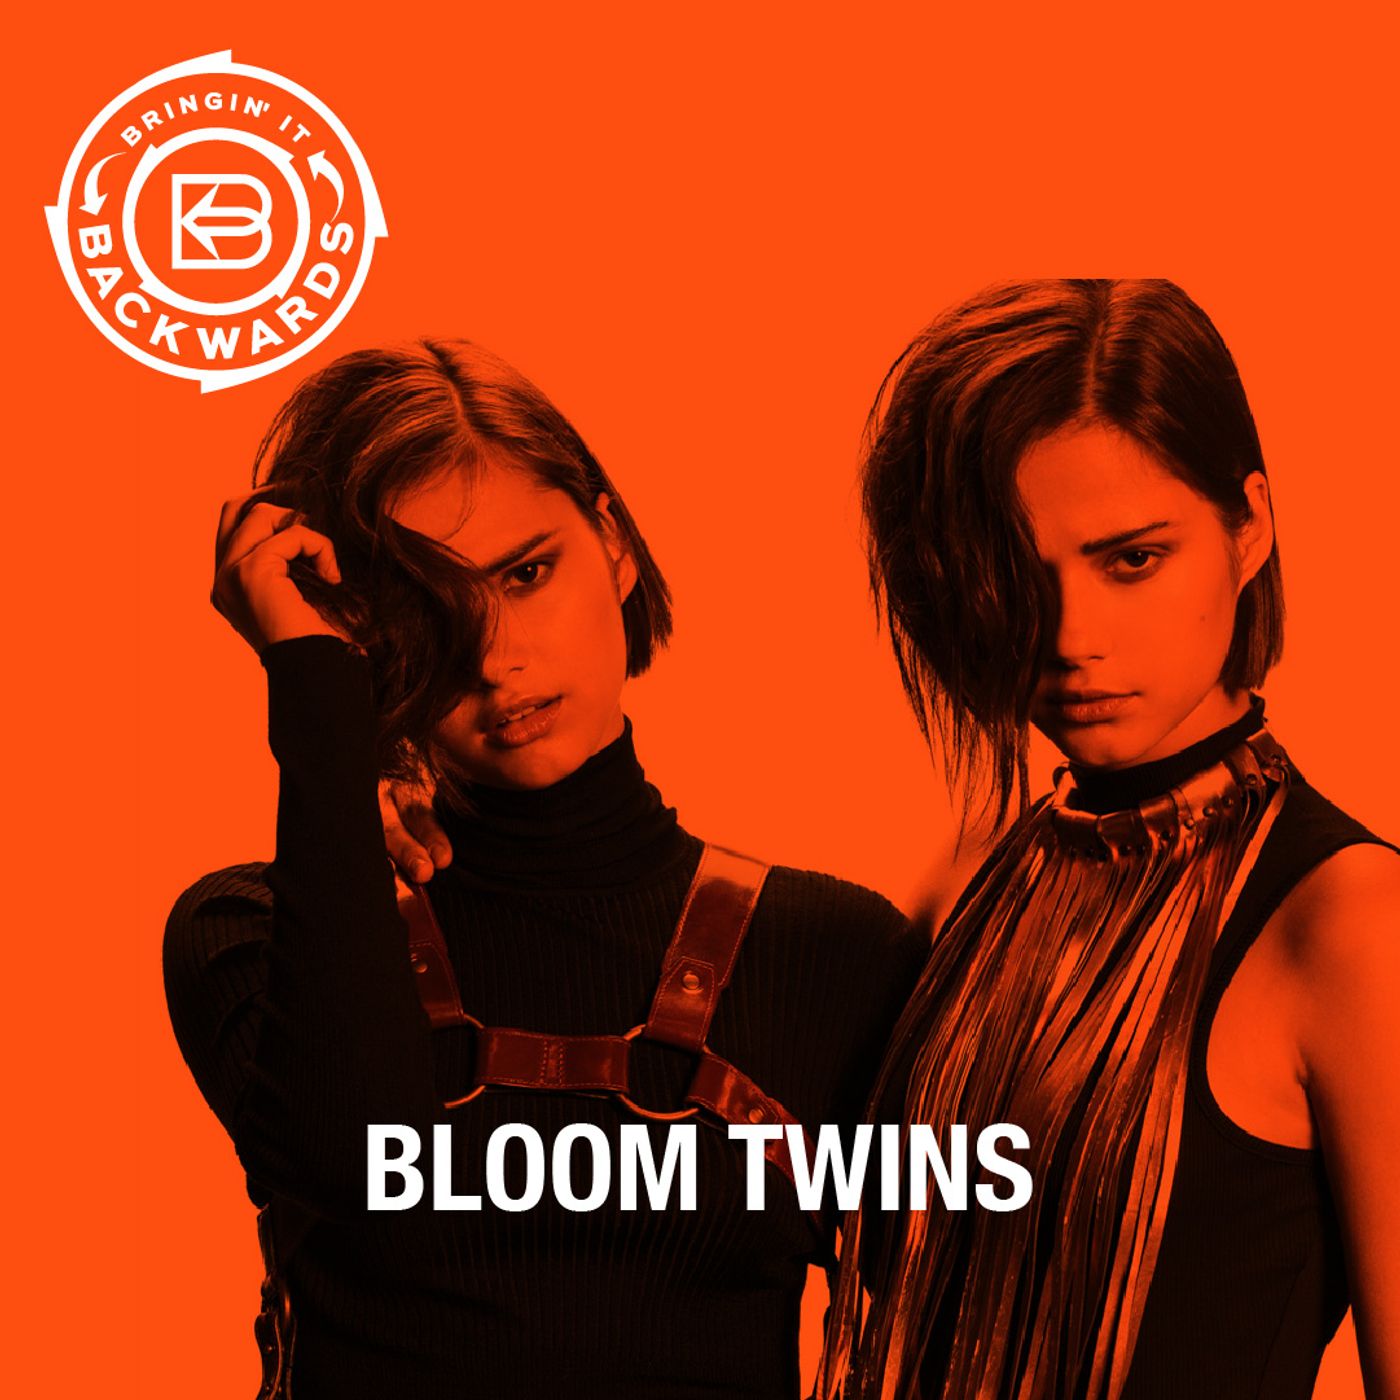 Interview with Bloom Twins Image